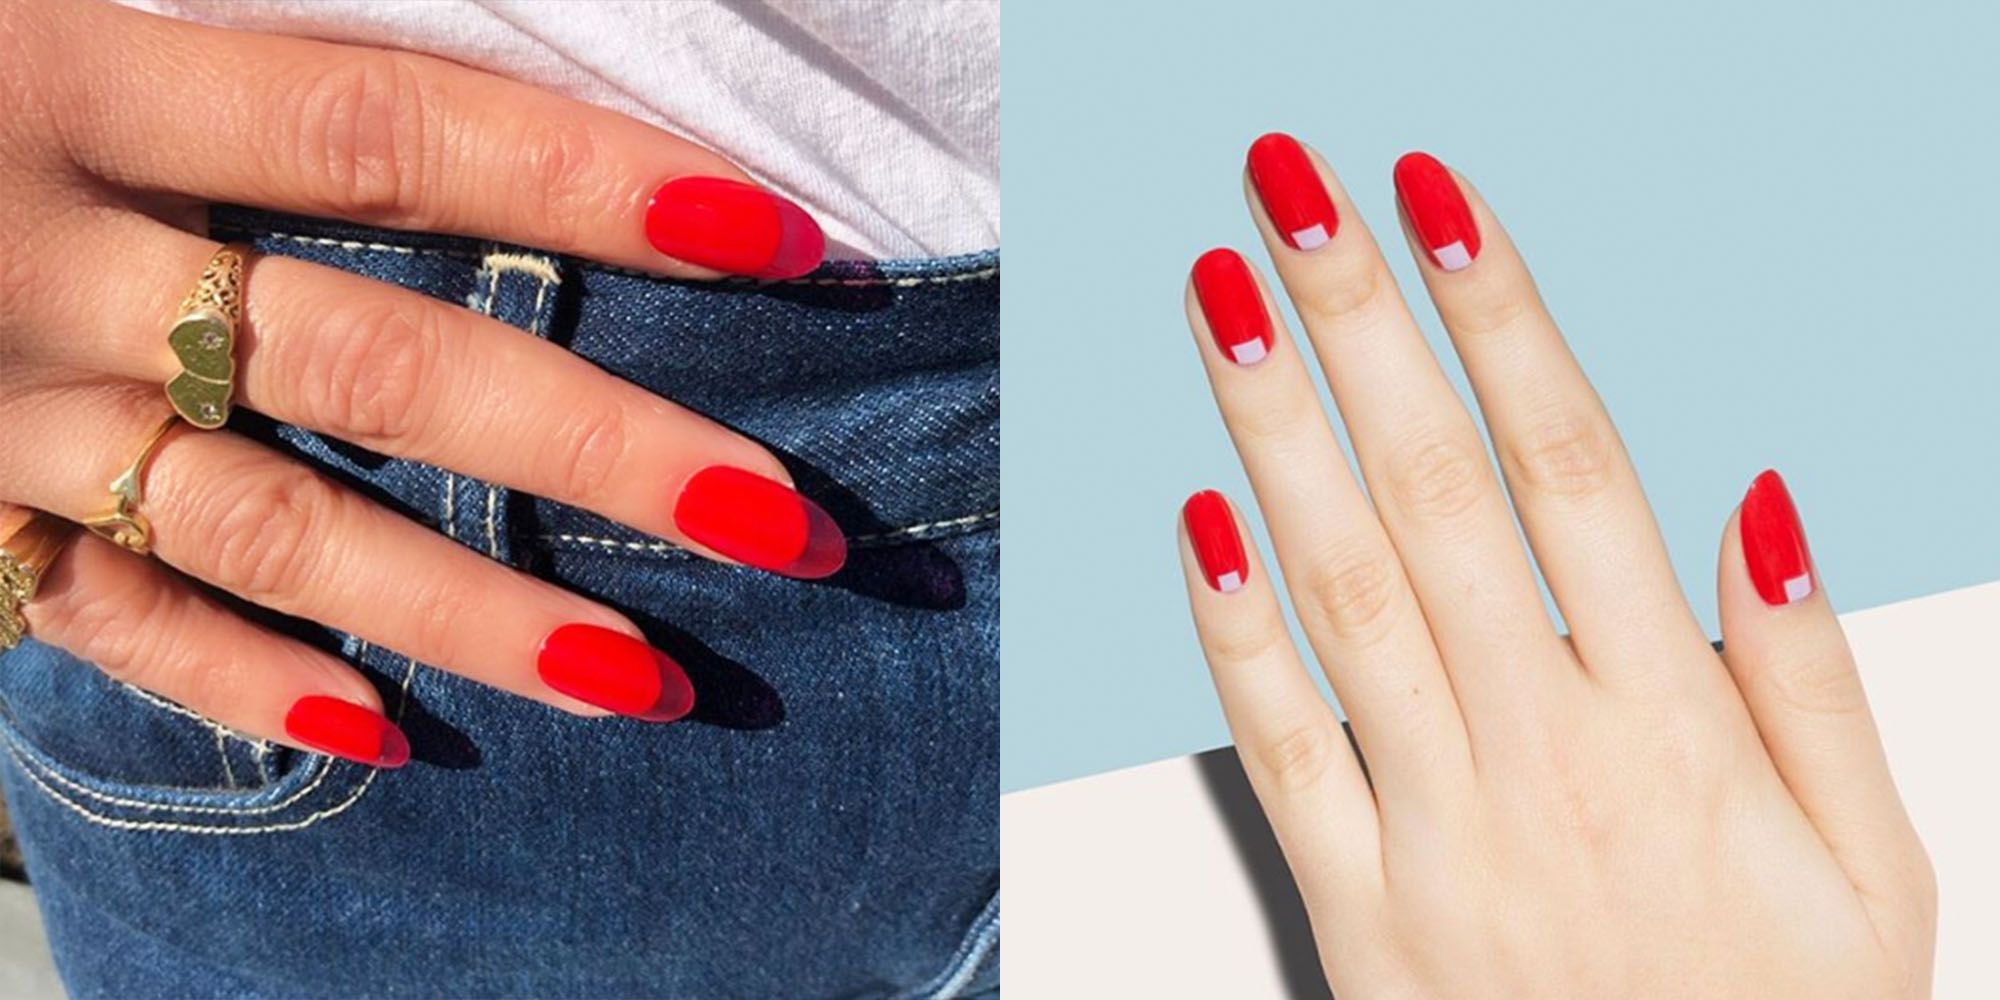 10 Colorful Nails Designs for a Bold Manicure